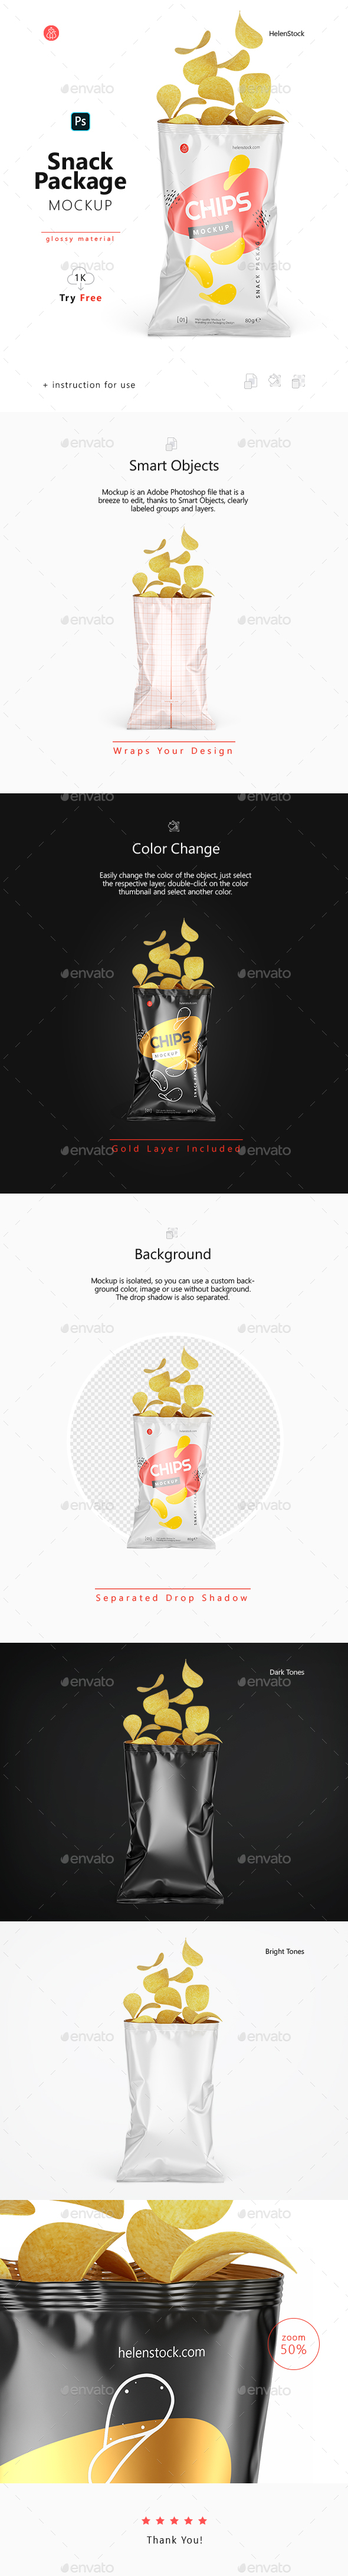 Download Opened Glossy Snack Package Mockup Front View By Helenstock Graphicriver Yellowimages Mockups